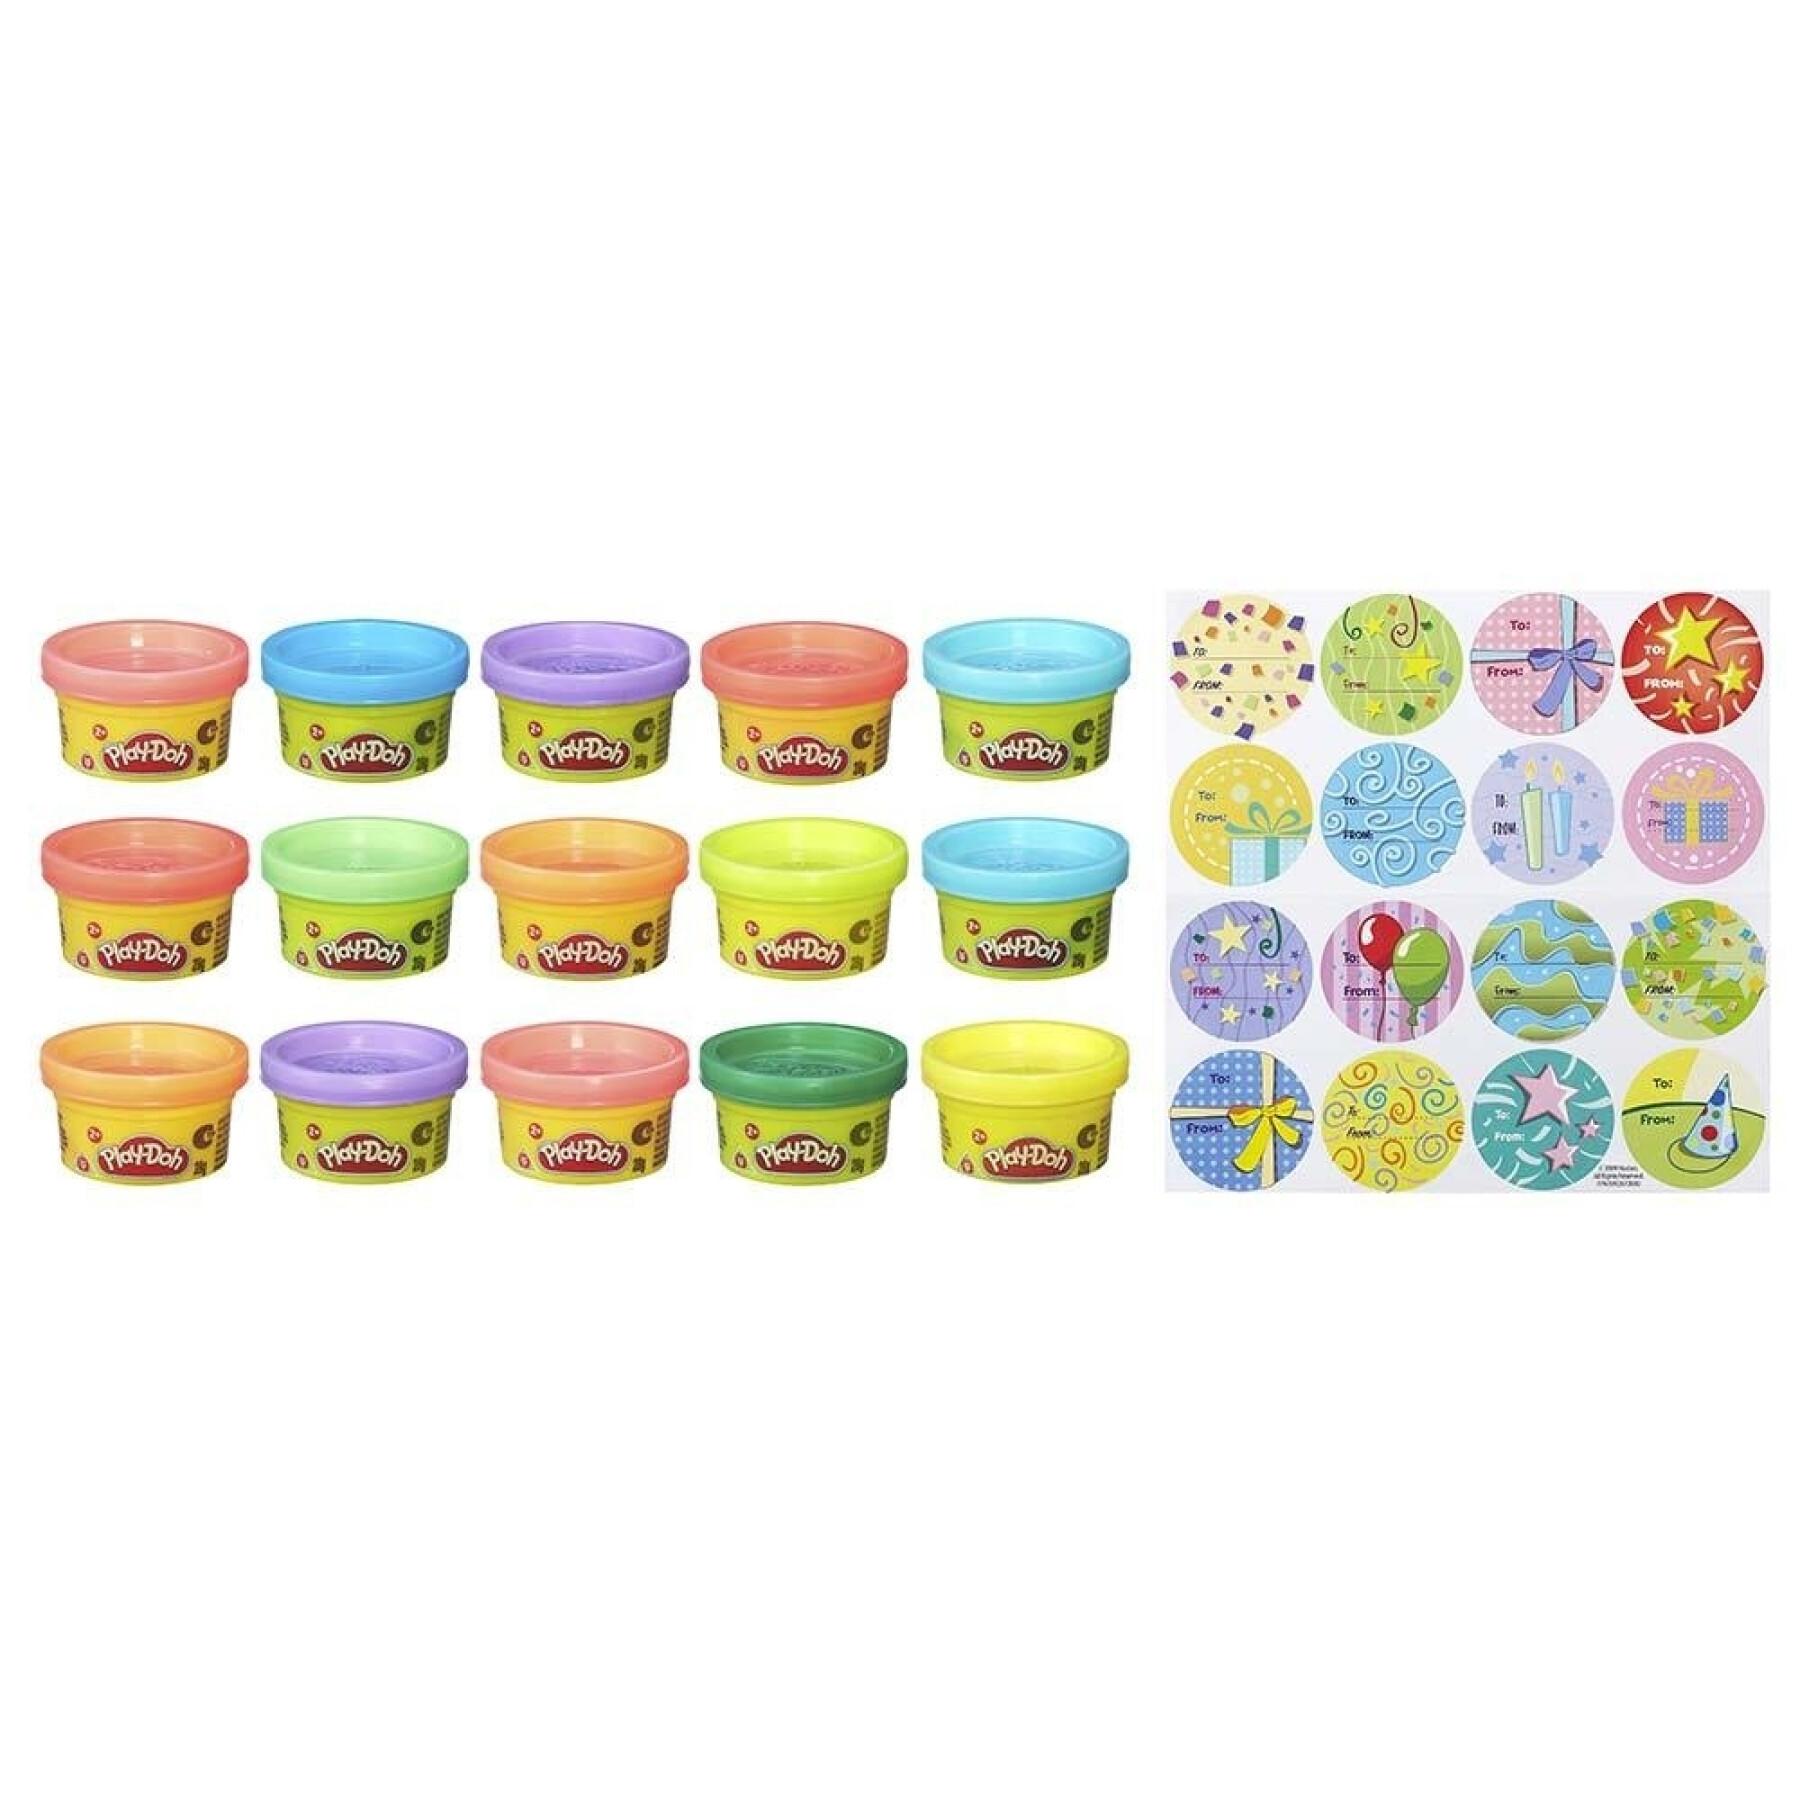 Pack of 15 boxes of modeling clay Play Doh